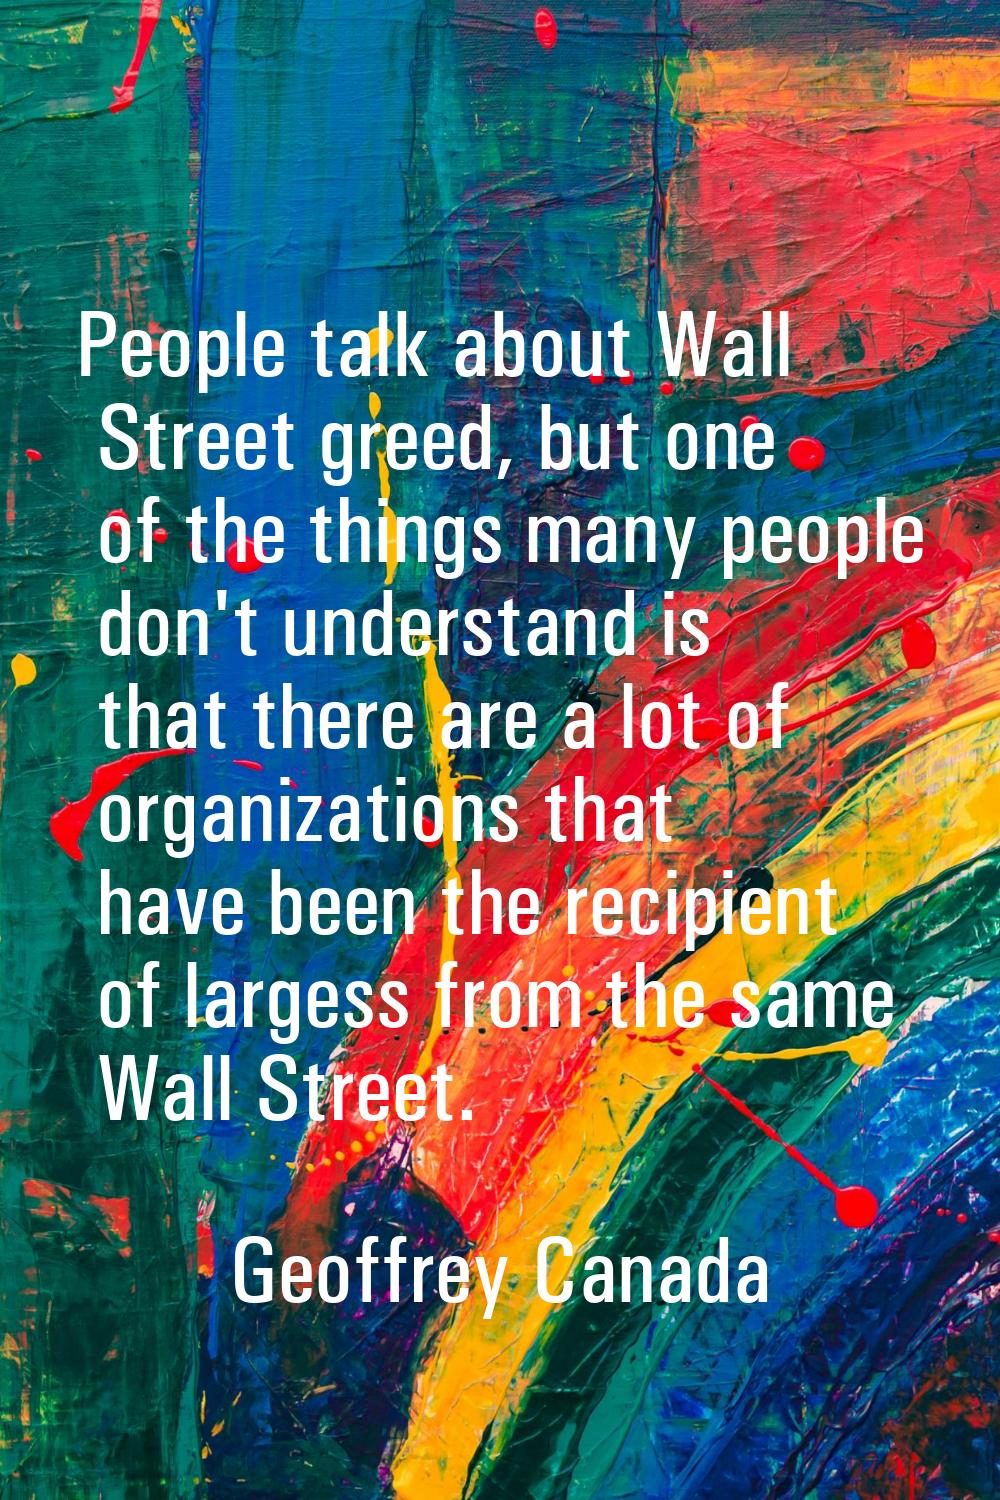 People talk about Wall Street greed, but one of the things many people don't understand is that the